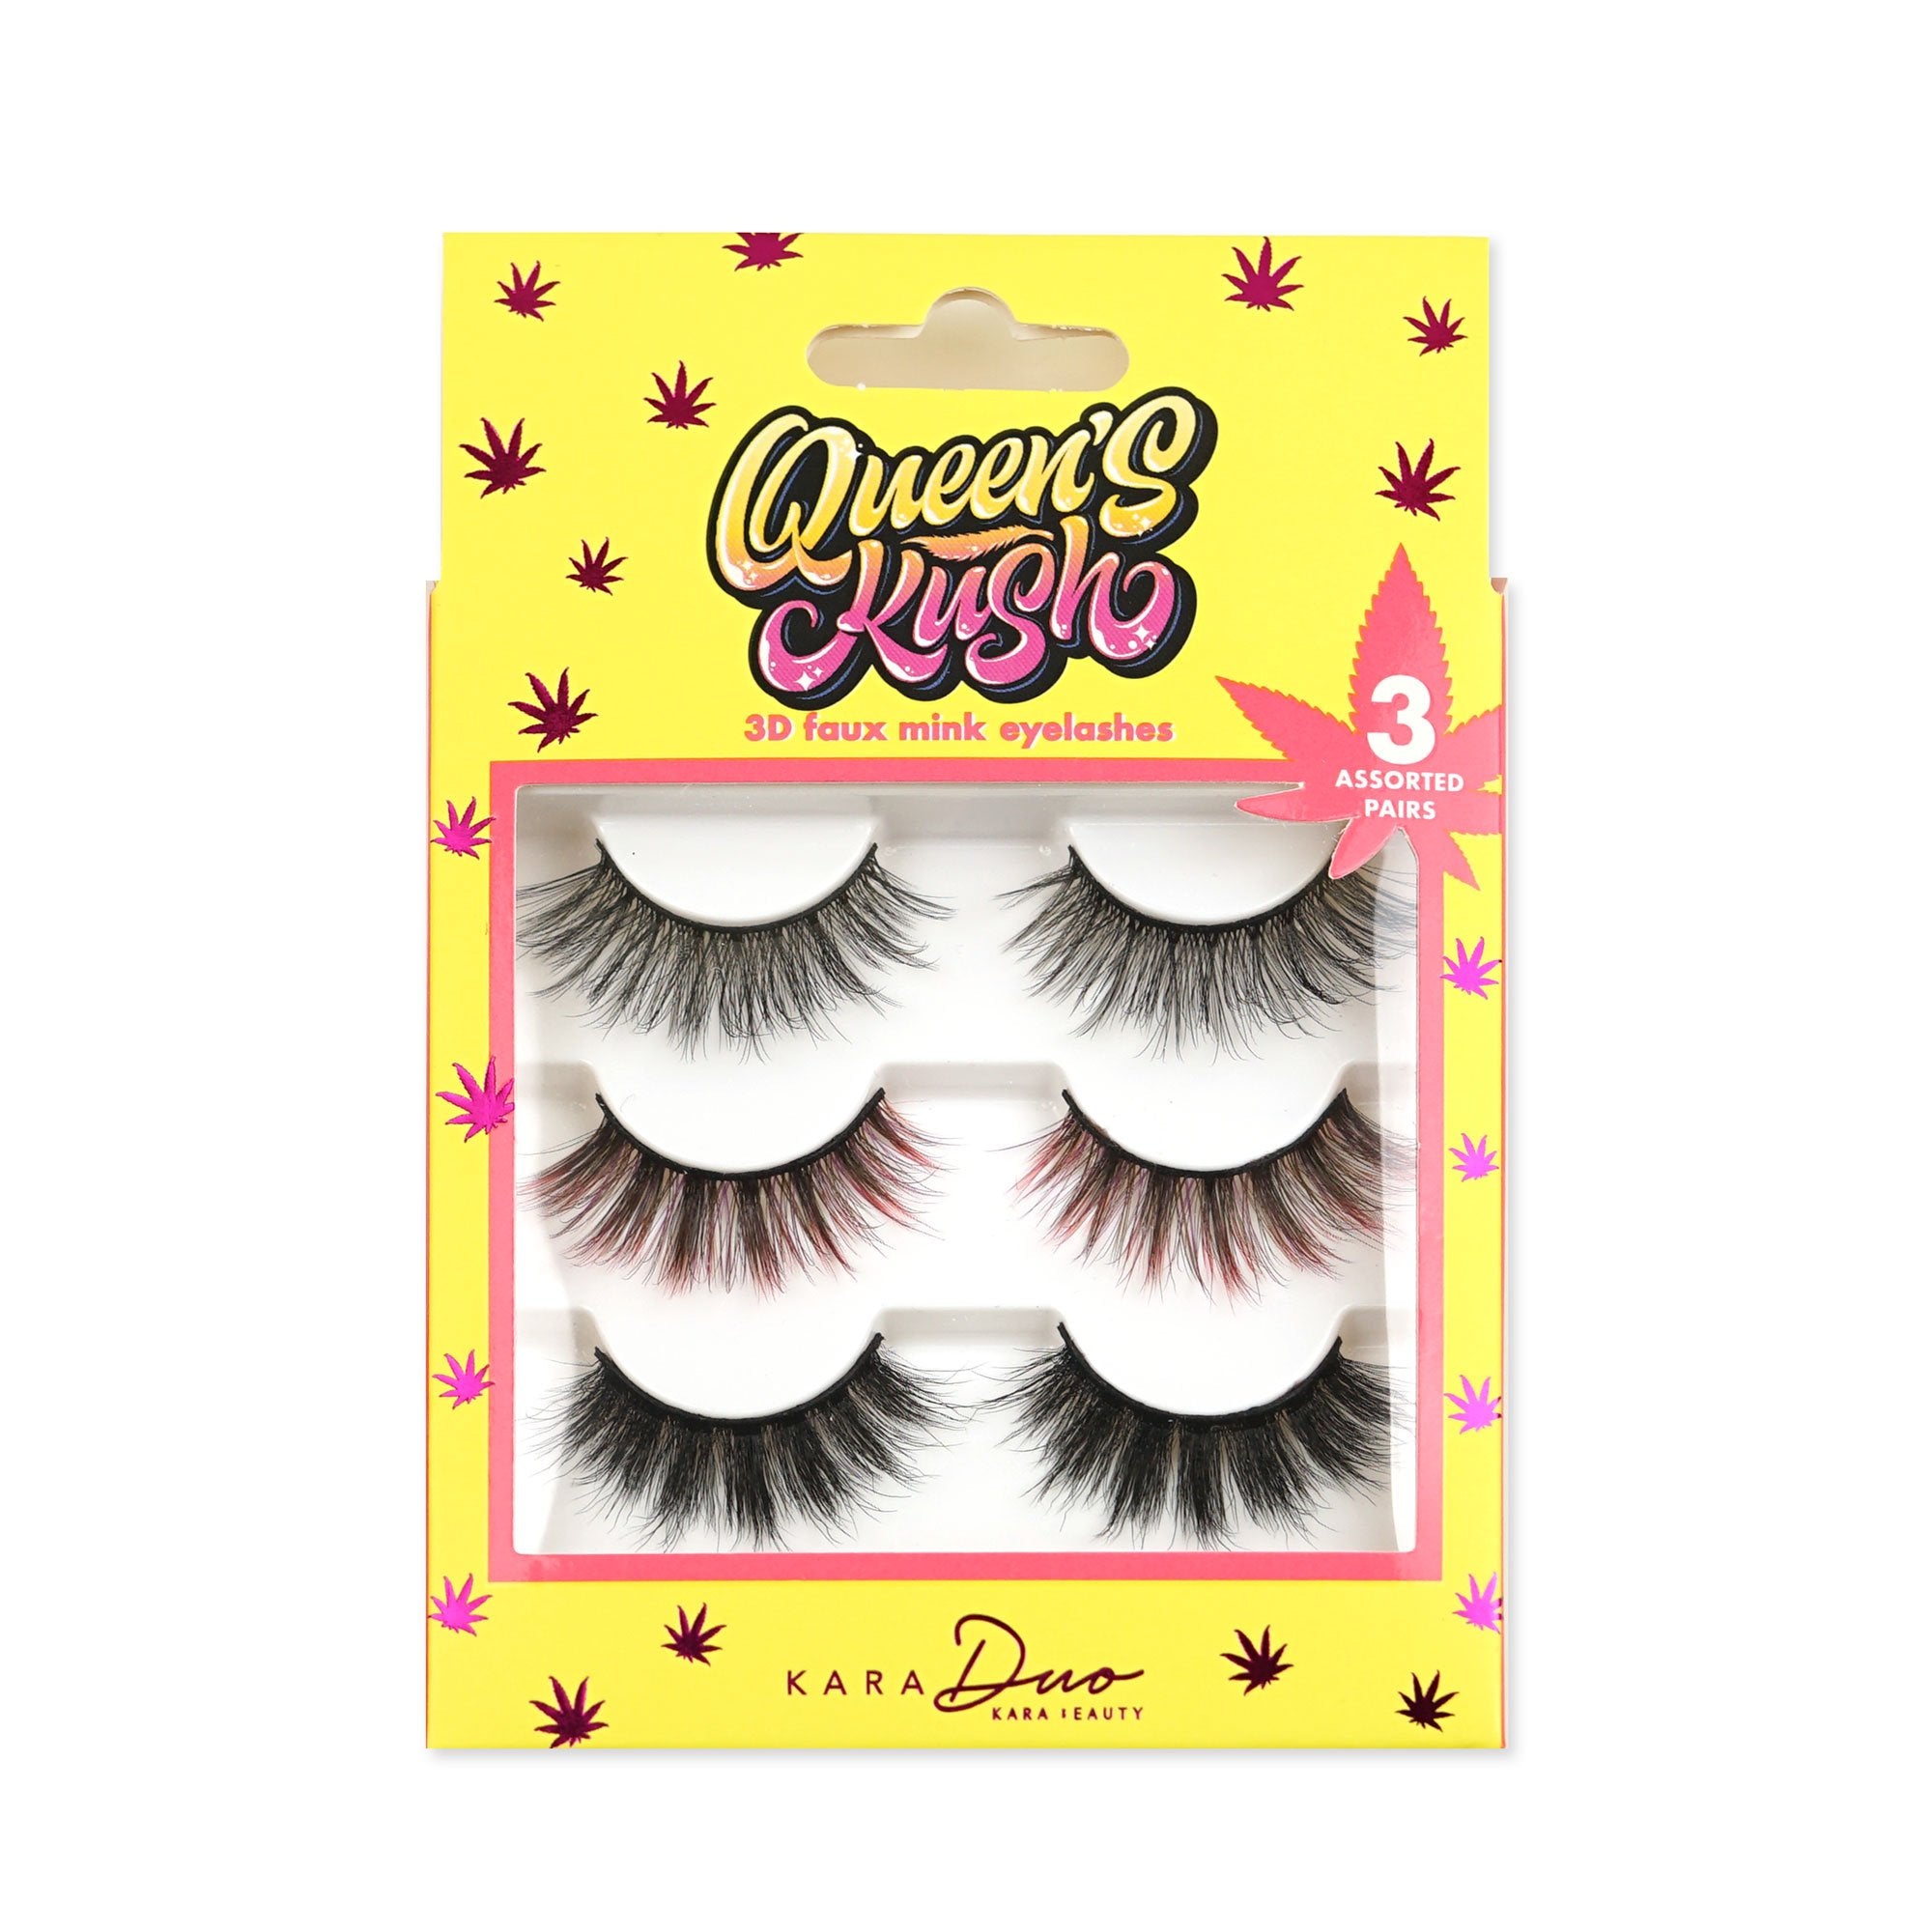 Queen's Kush 3 pack 3D Faux Mink eyelashes